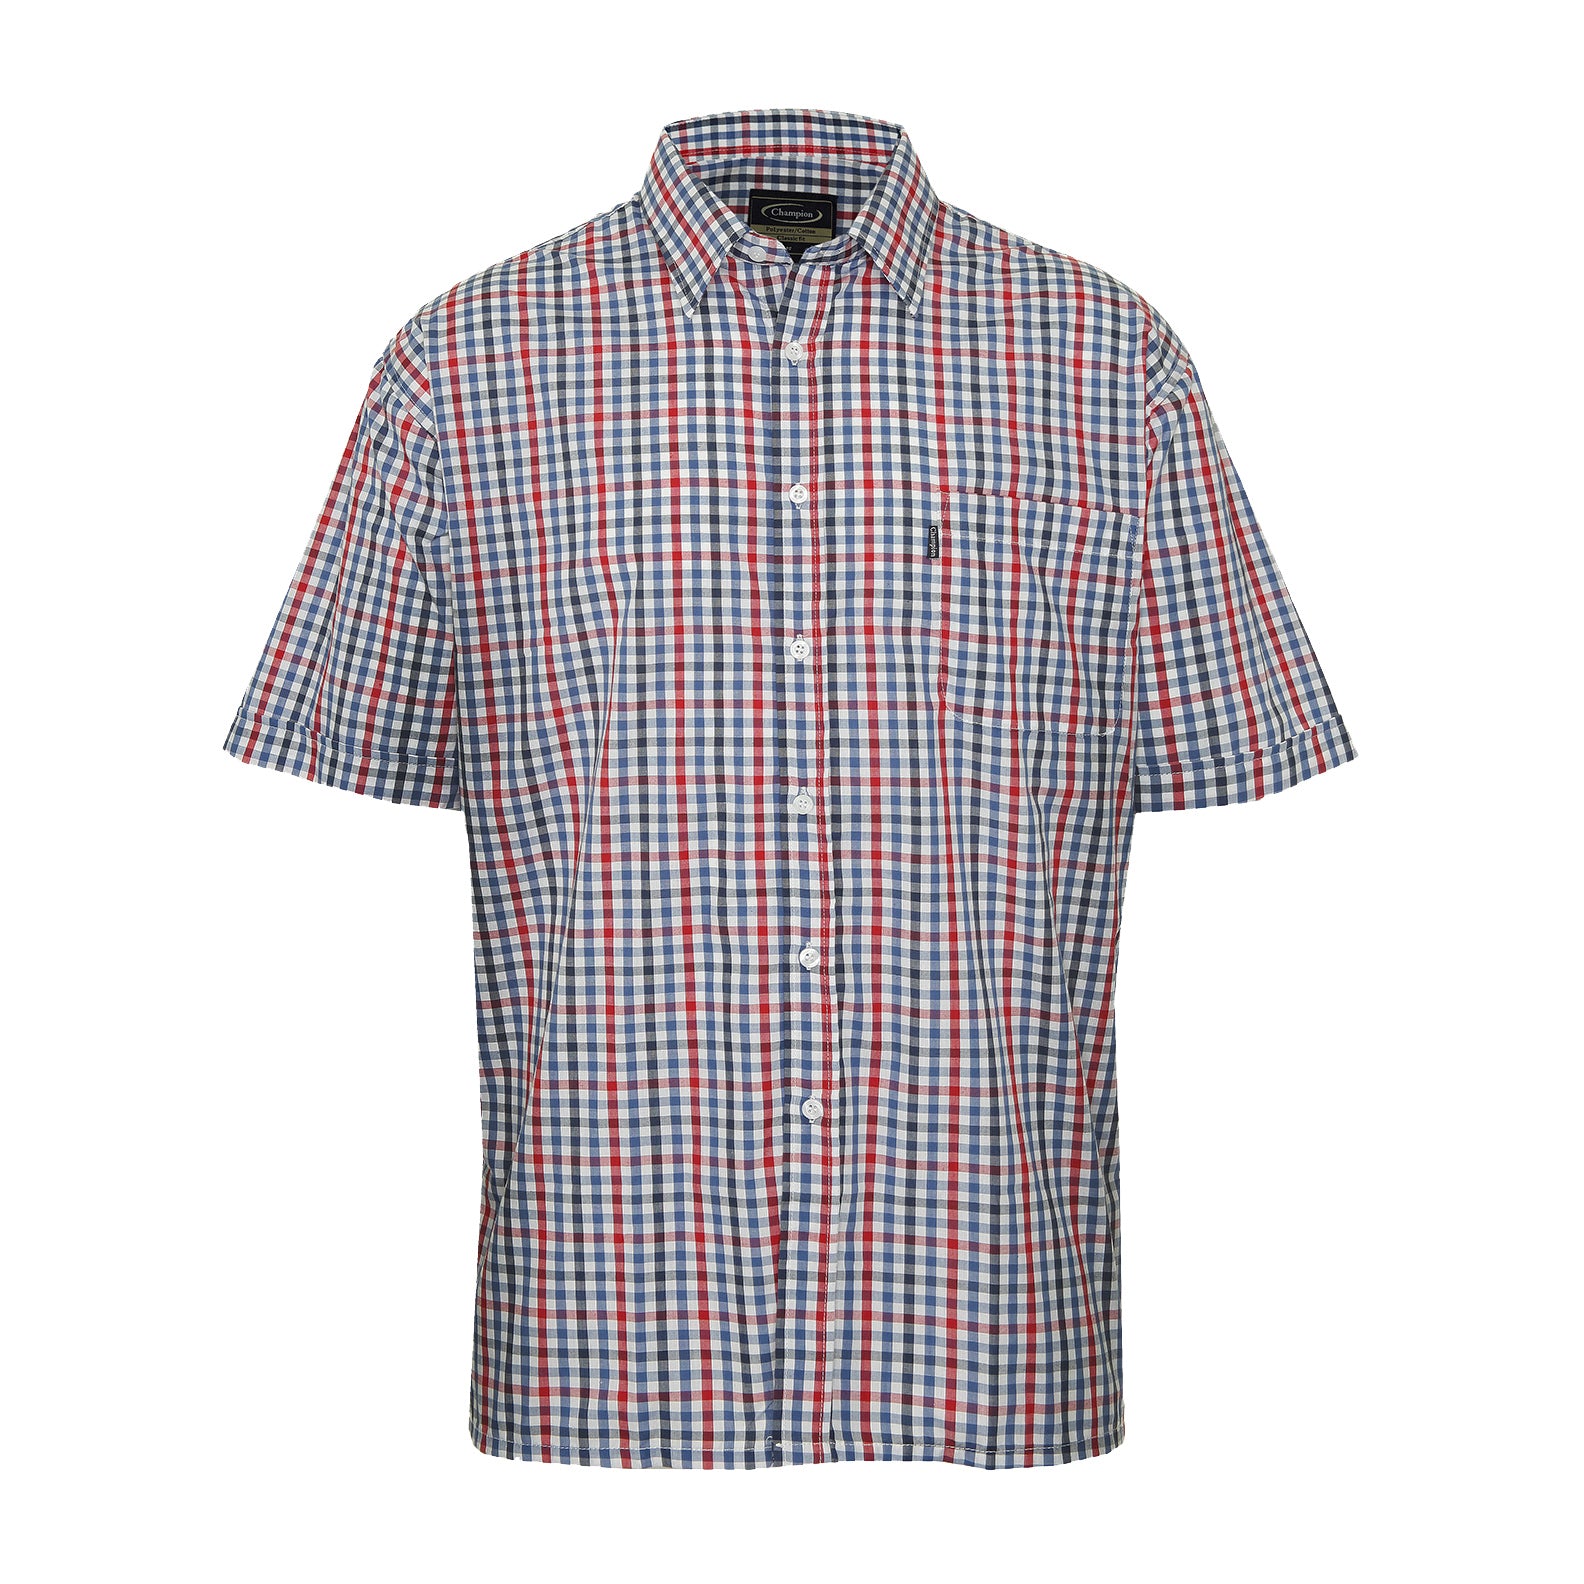 Champion Doncaster Short Sleeve Shirt | Champion Shirts – New Forest ...